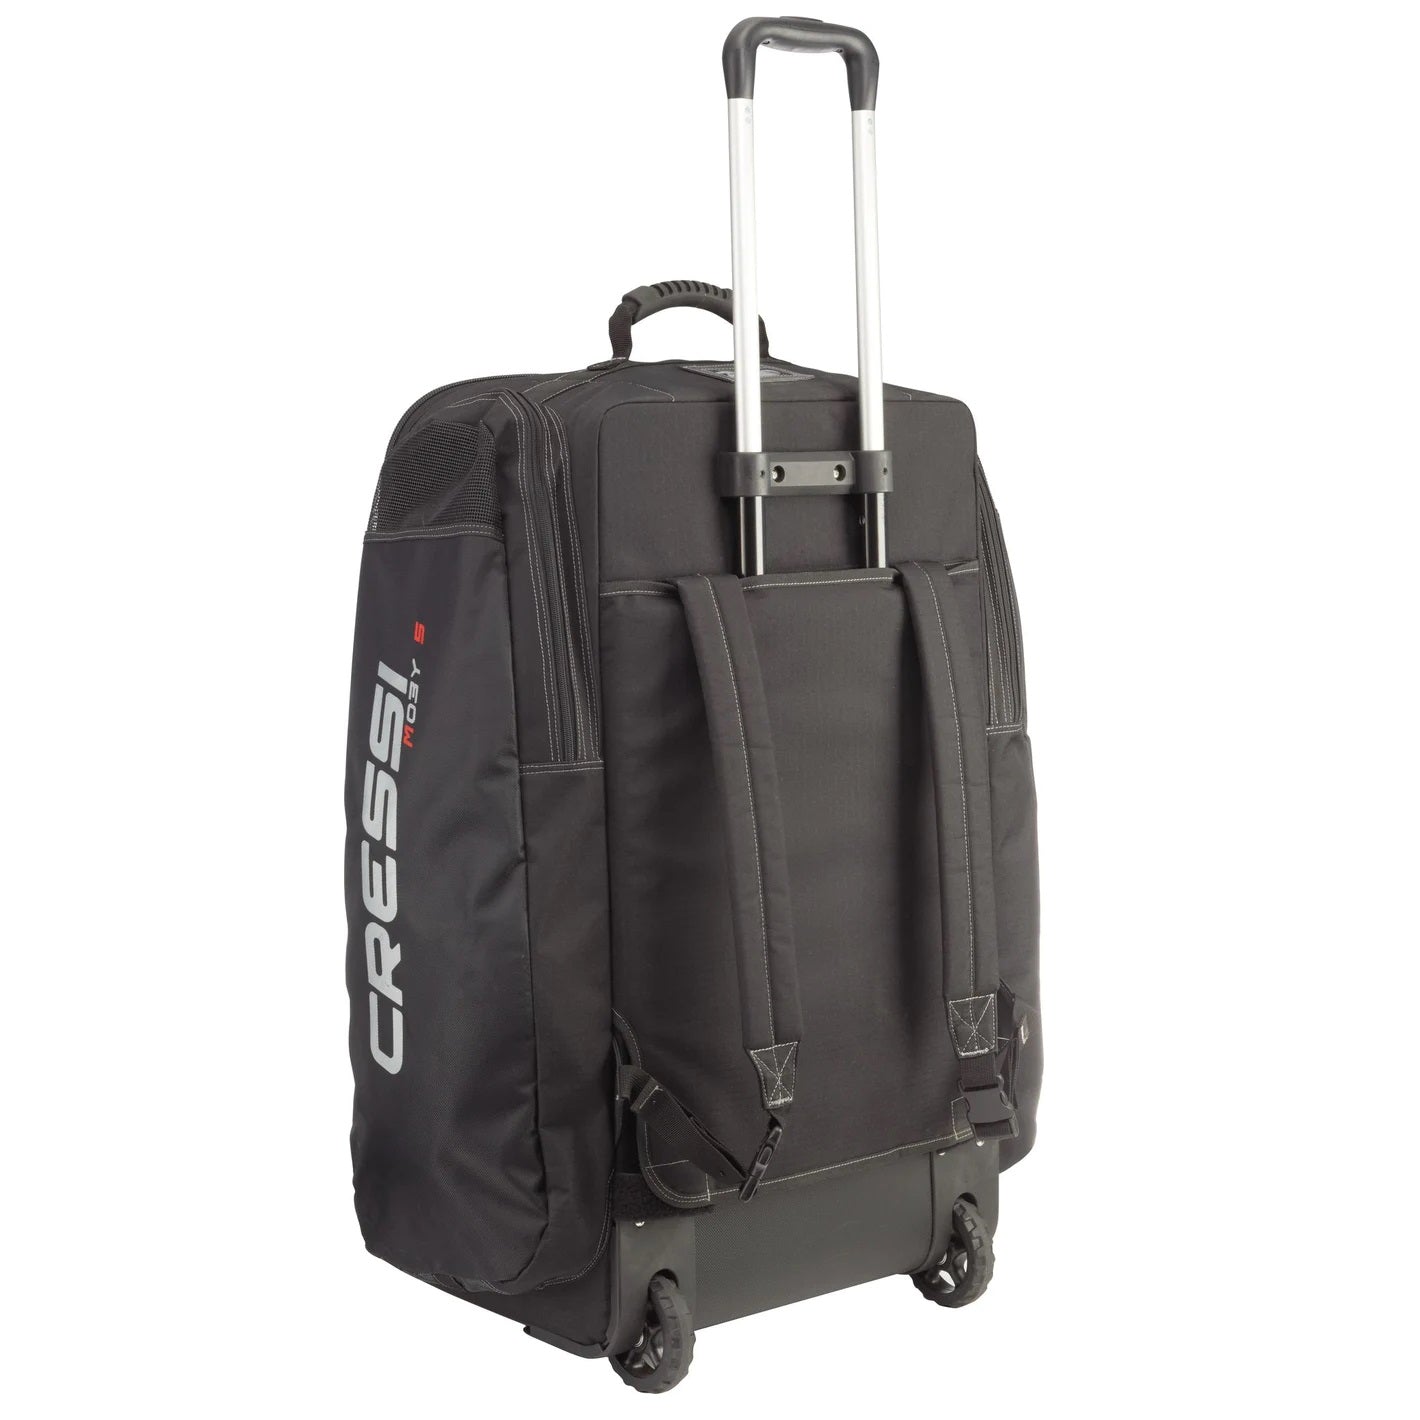 Moby 5 Trolley Bag